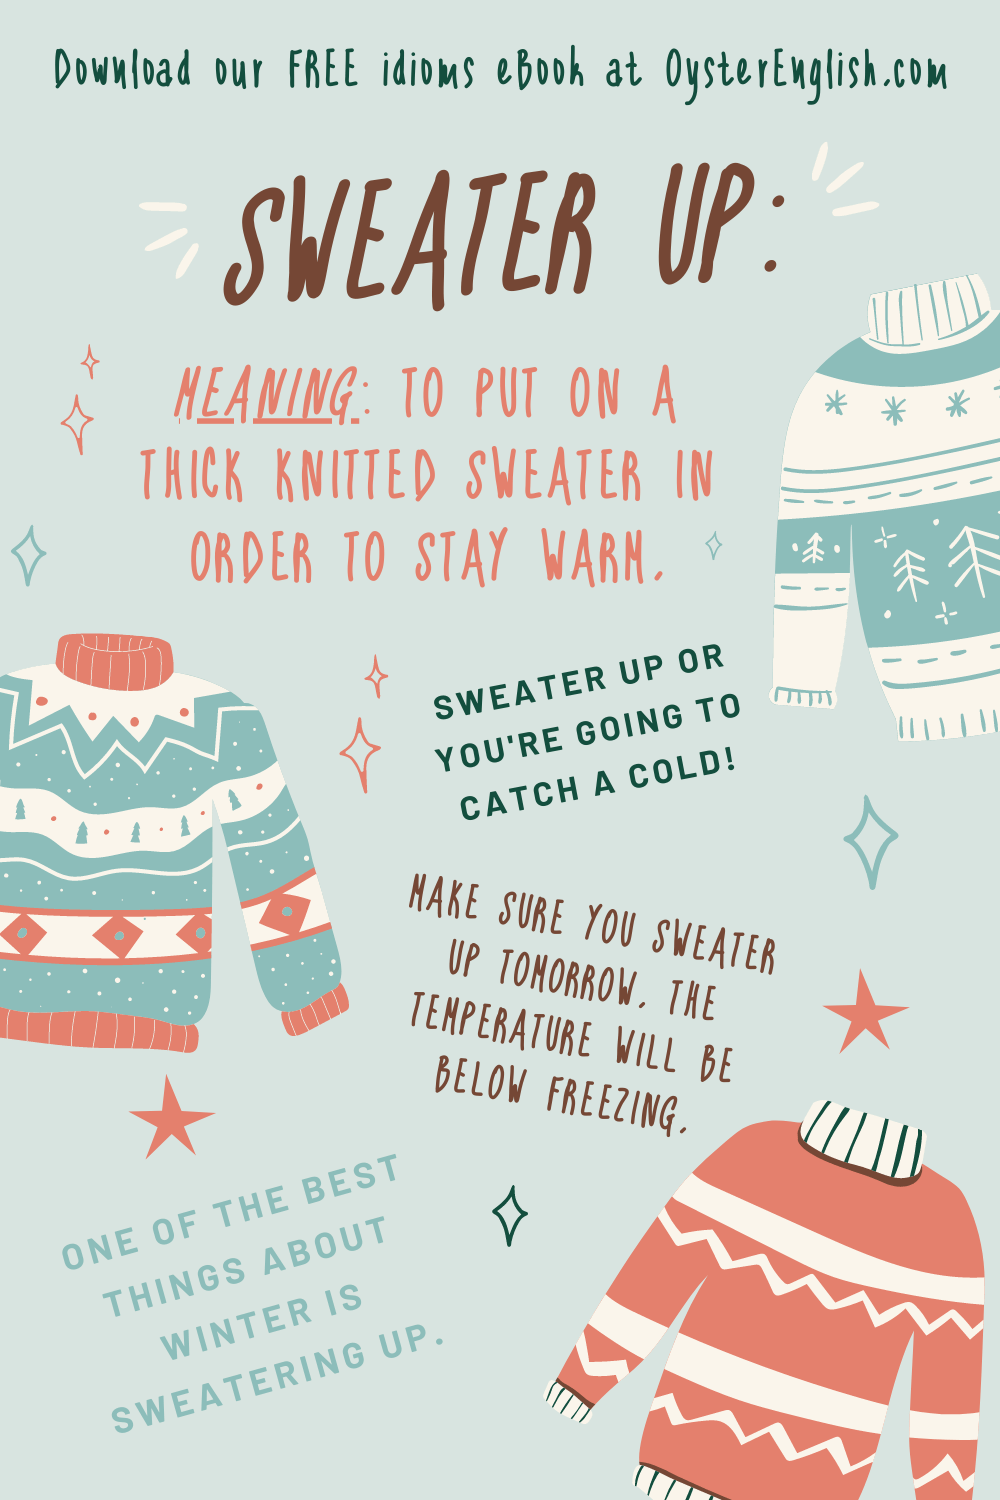 Illustration of different sweaters with examples of "sweater up." Sweater up you you're going to catch a cold. Make sure you sweater up tomorrow. The temperature will be below freezing."